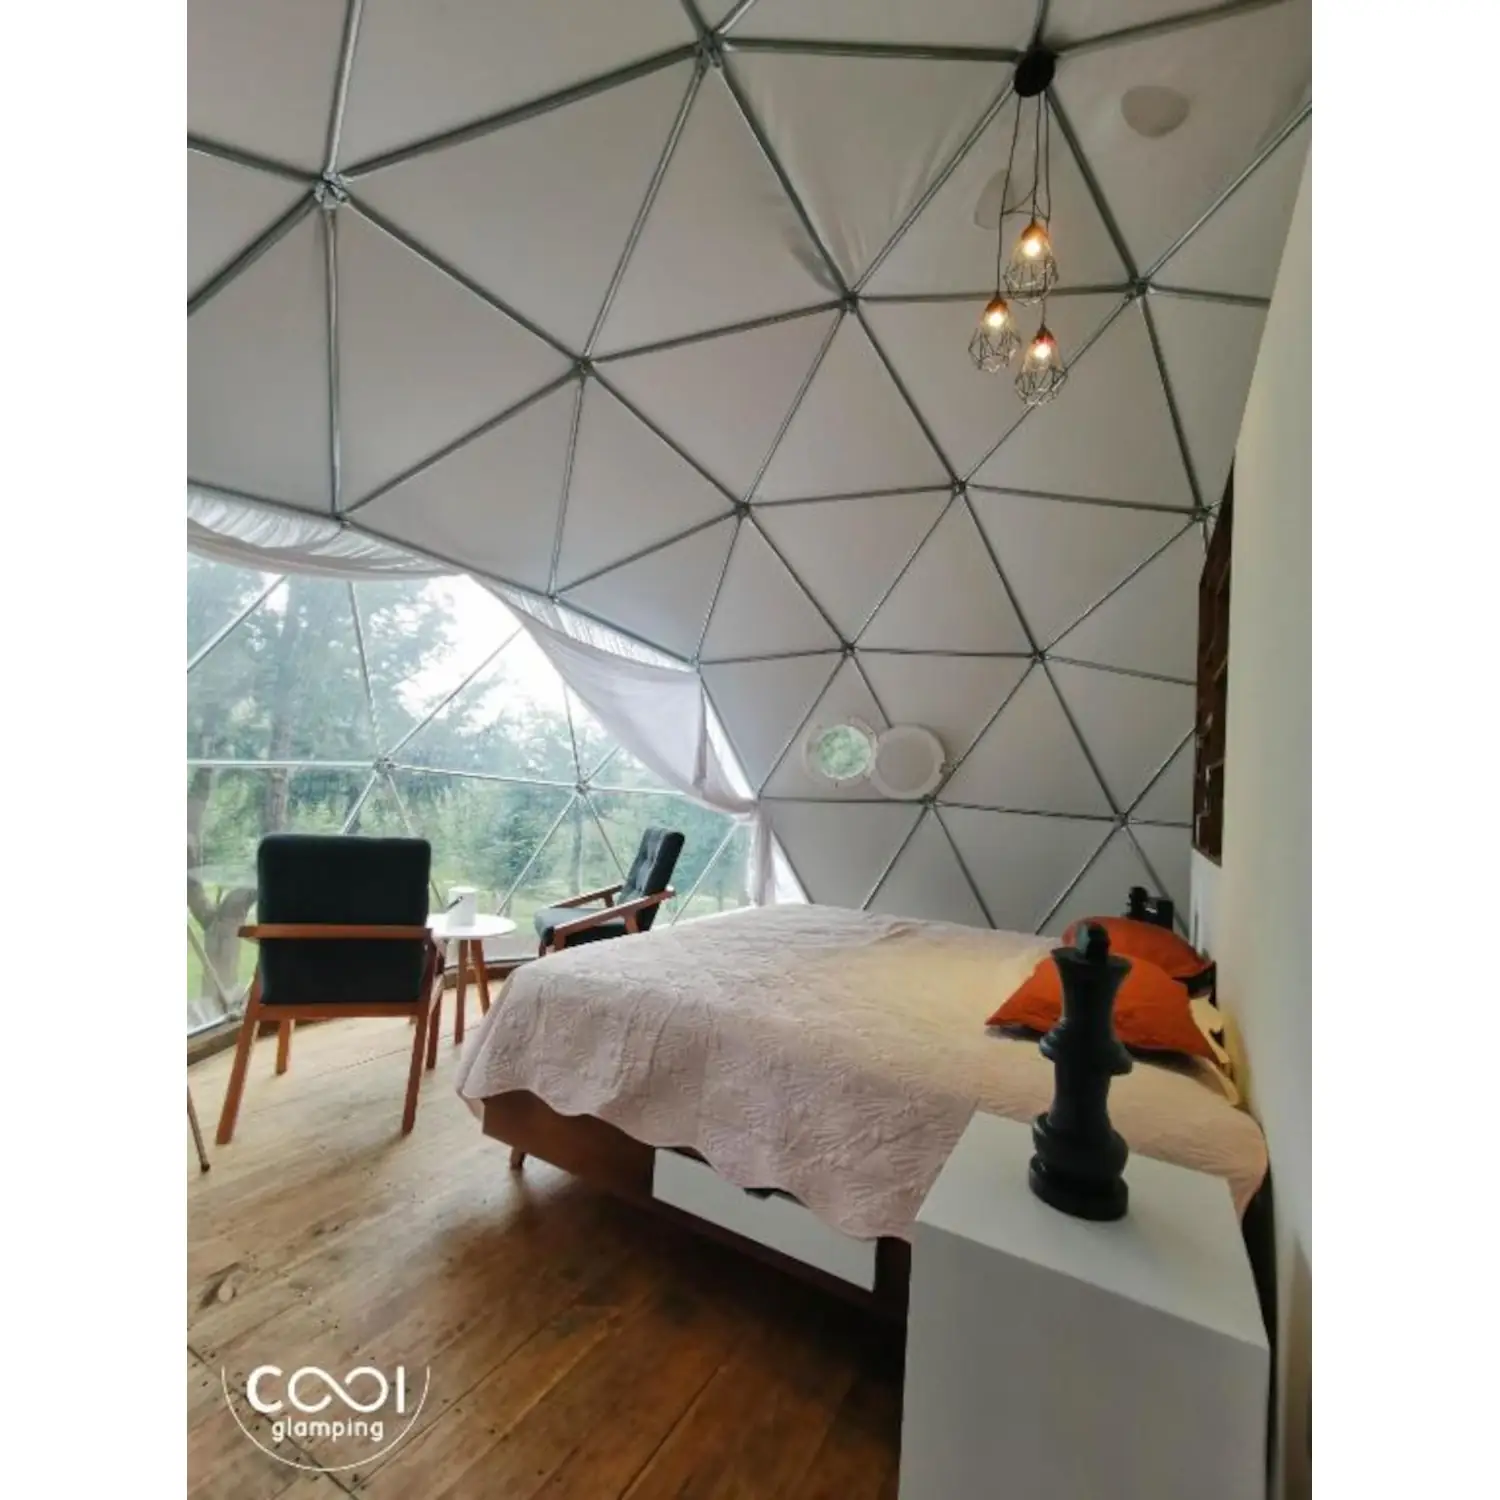 6m-glamping-dome-in-budget (7)